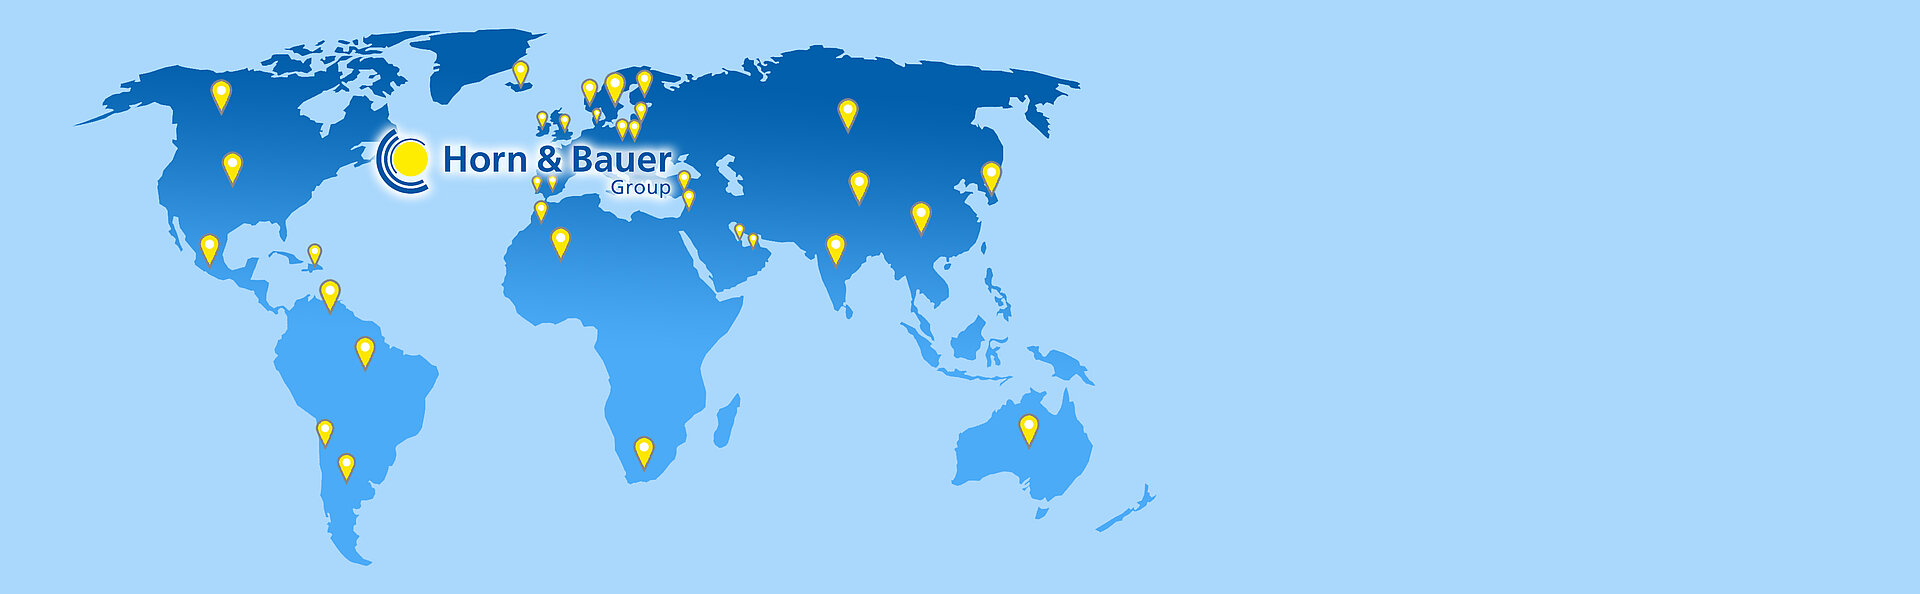 We are internationally positioned <br> and serve customers all over the world